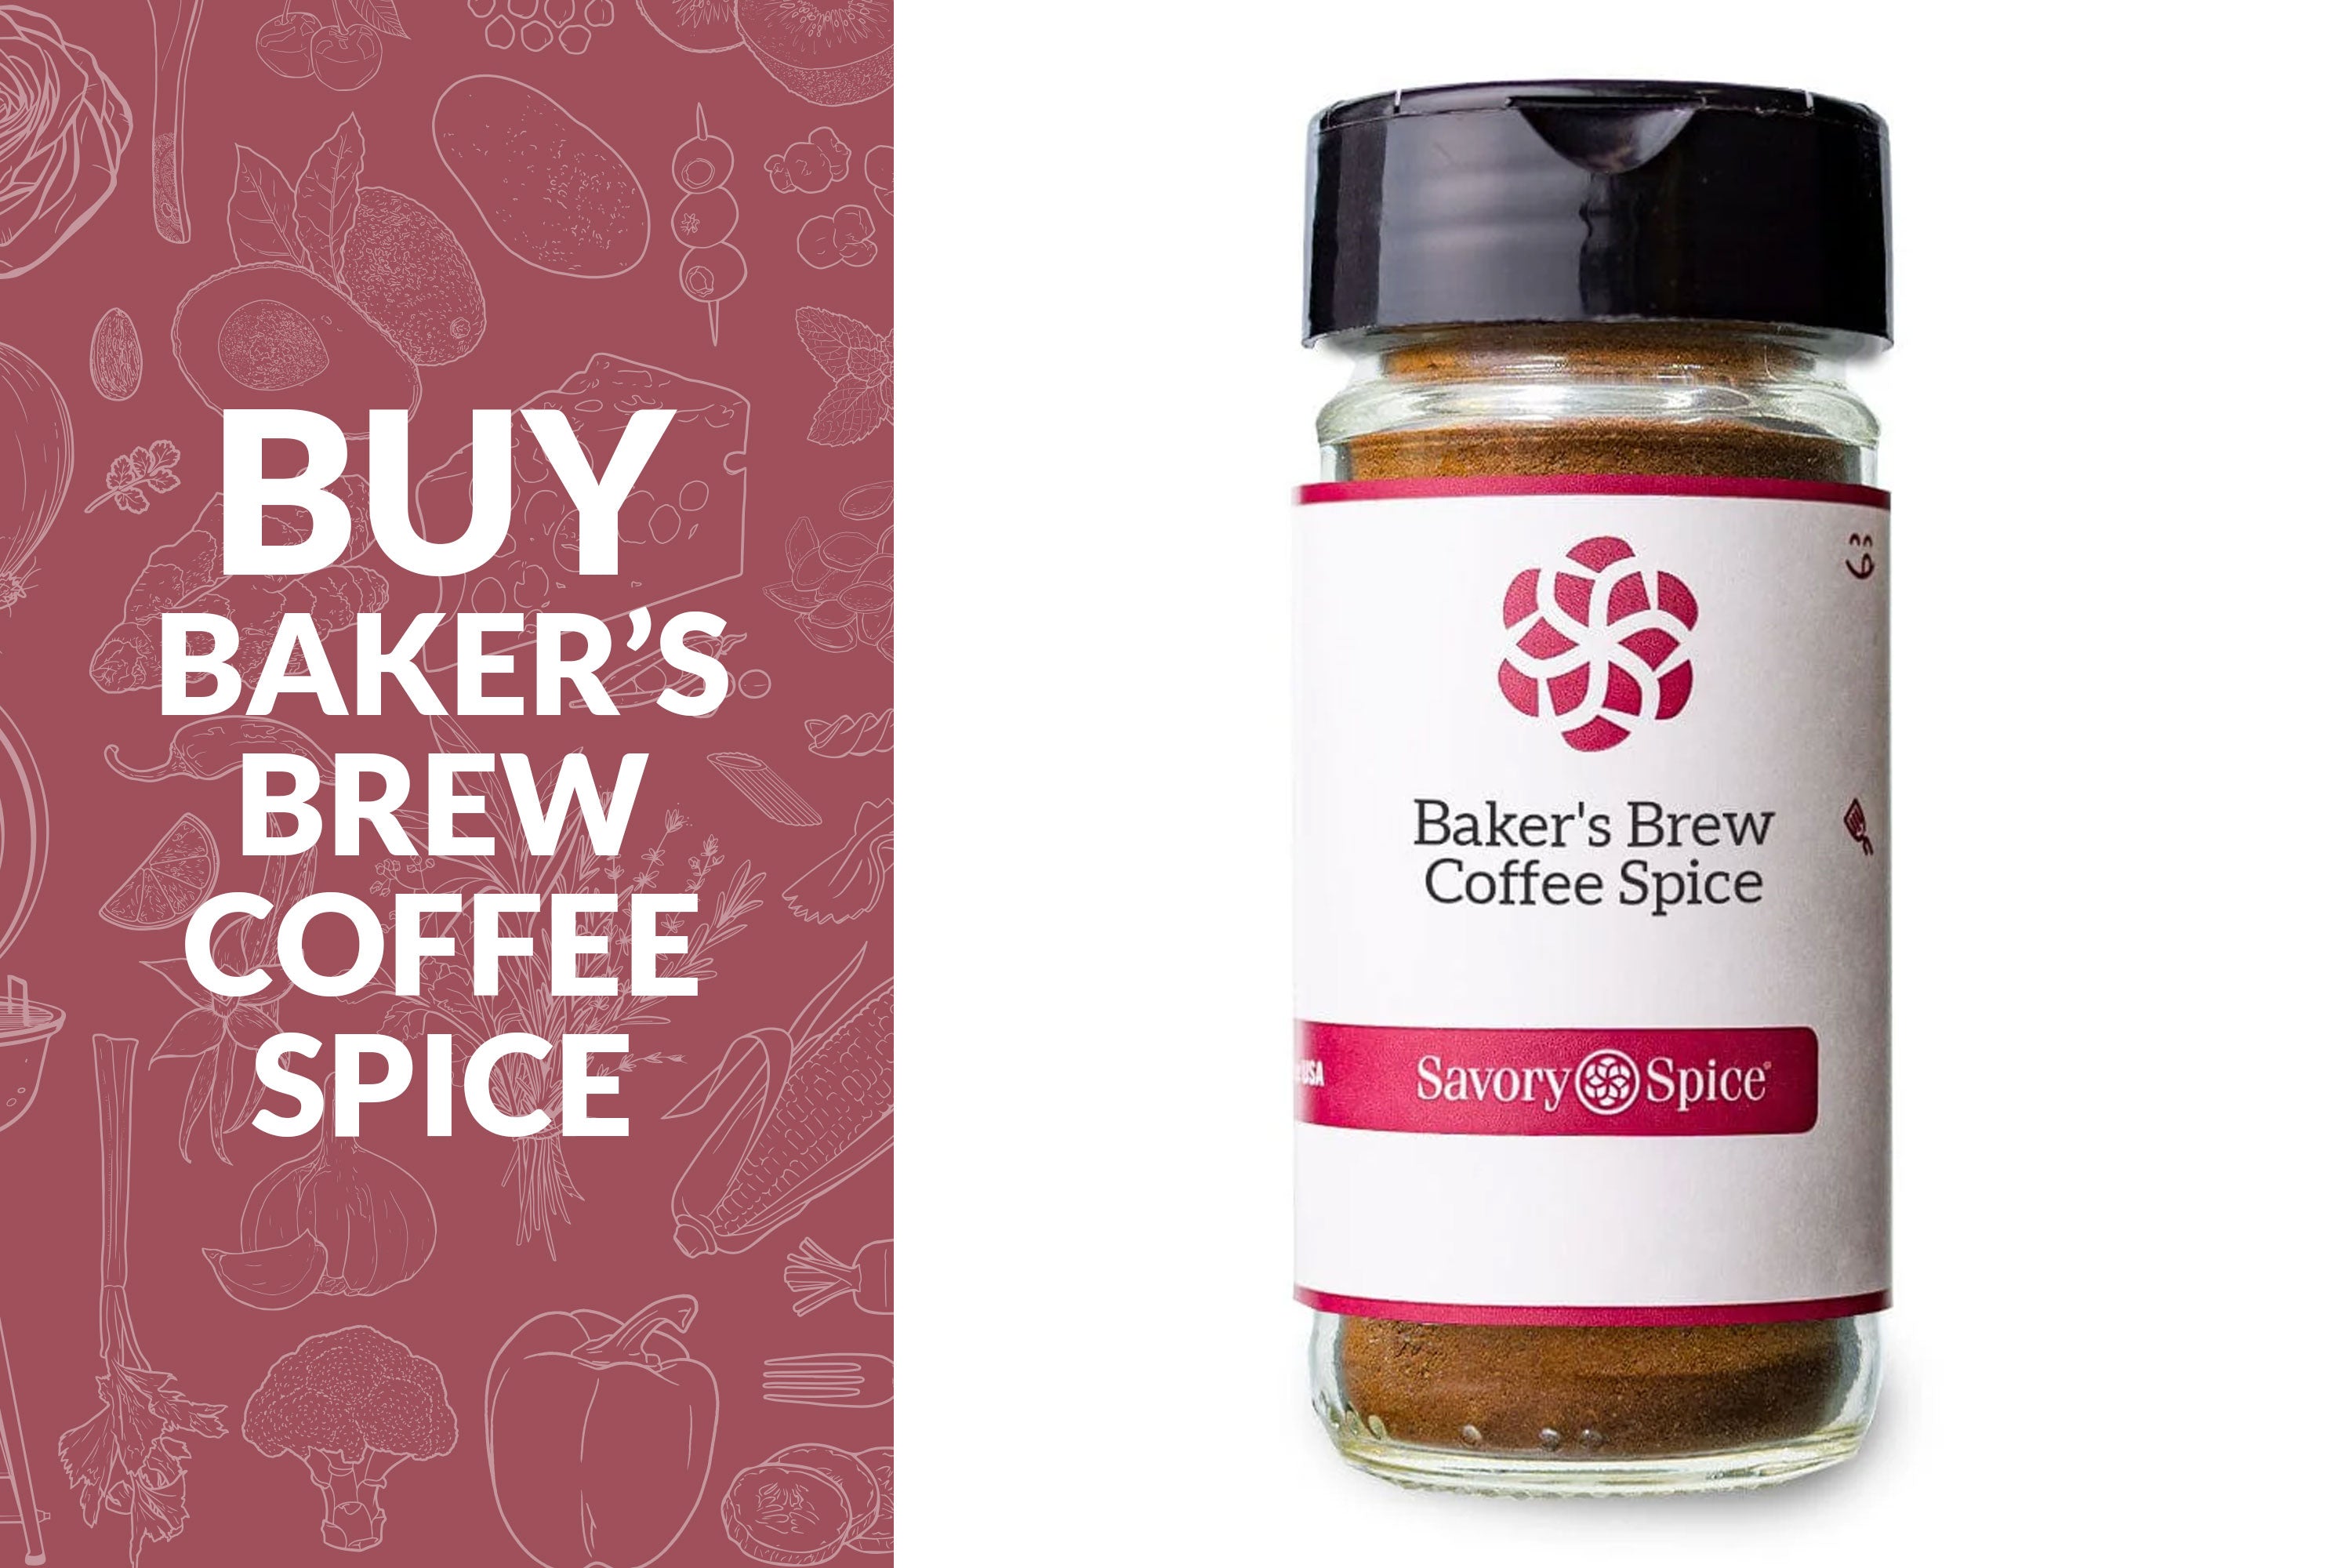 Buy Baker's Brew Coffee Spice on left with jar of spice on the right